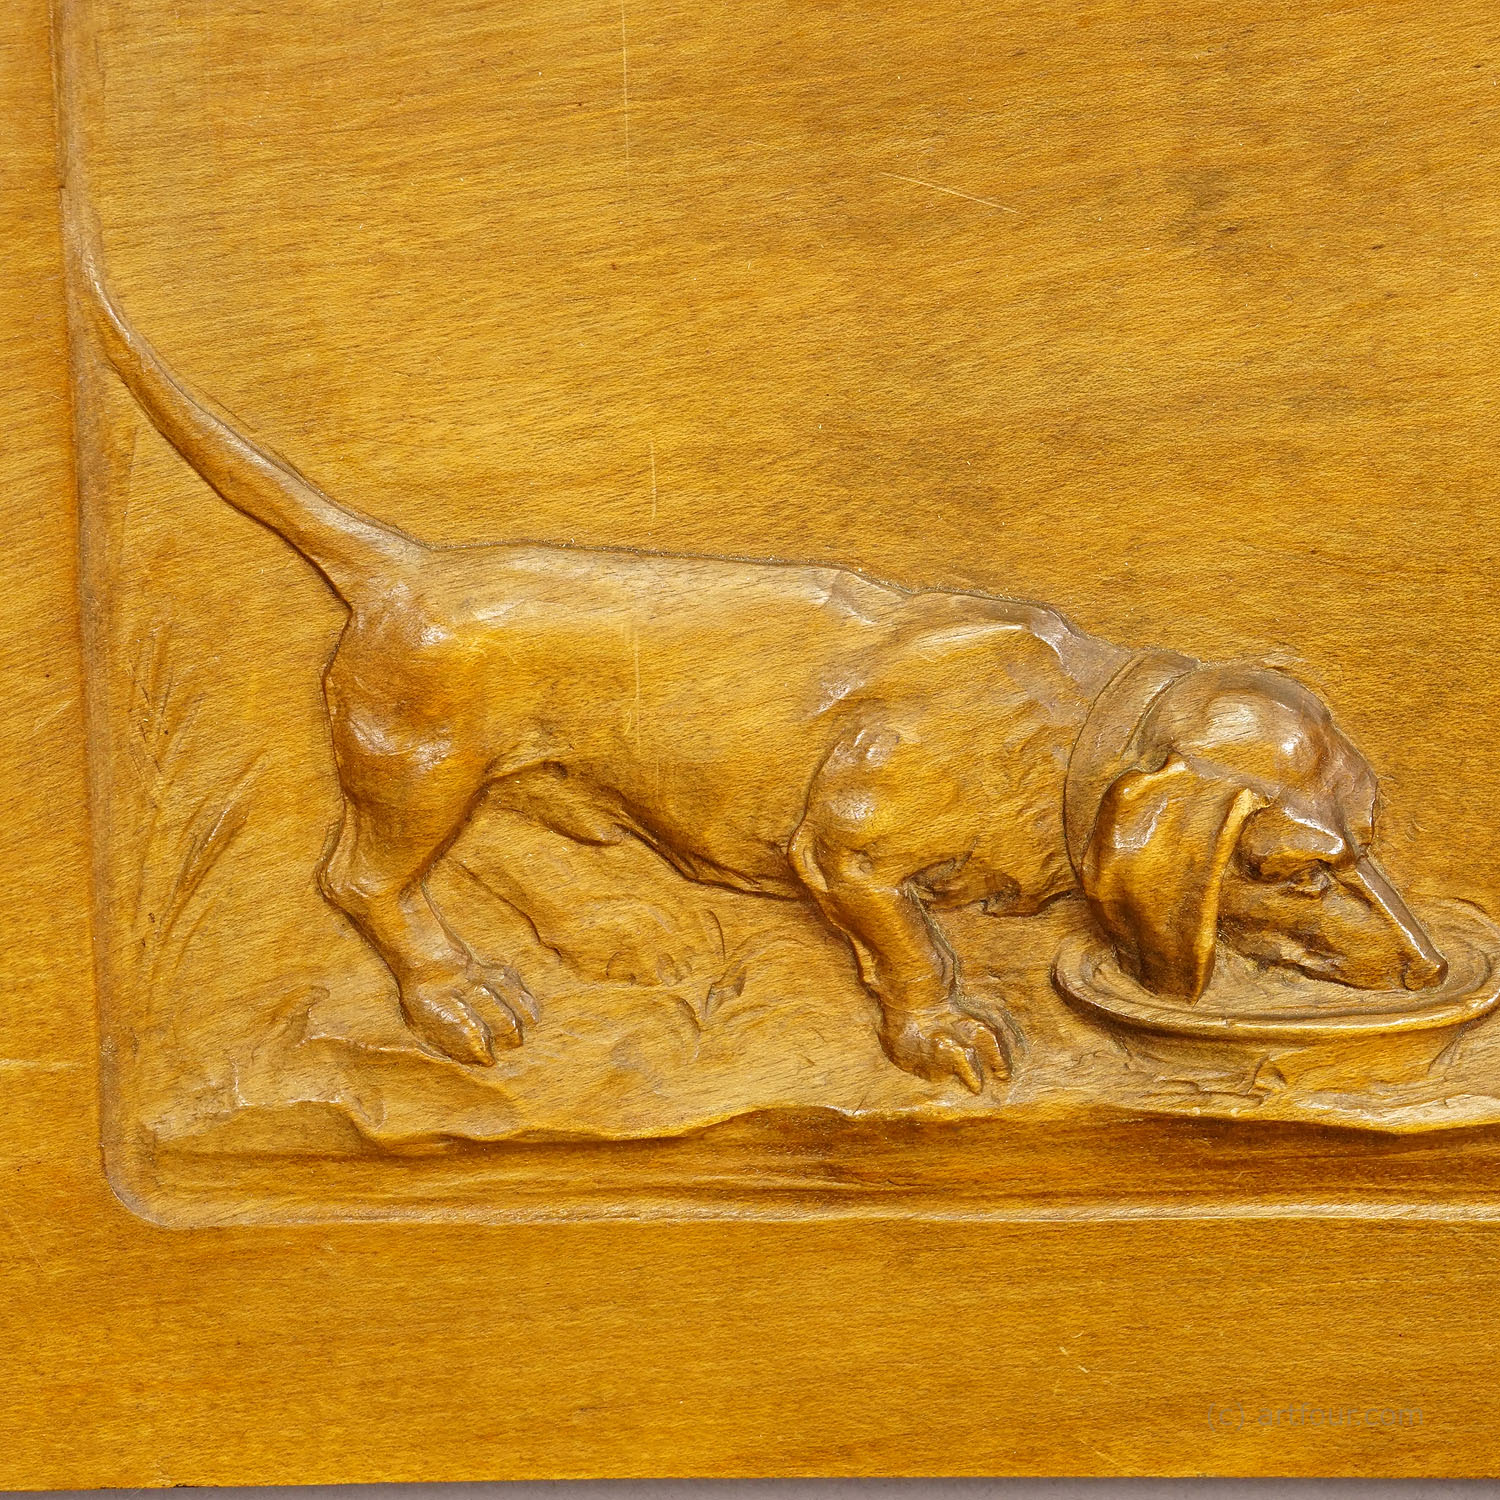 Wall Relief Wood Carving with Farmer Boy and Dachshund ca. 1900